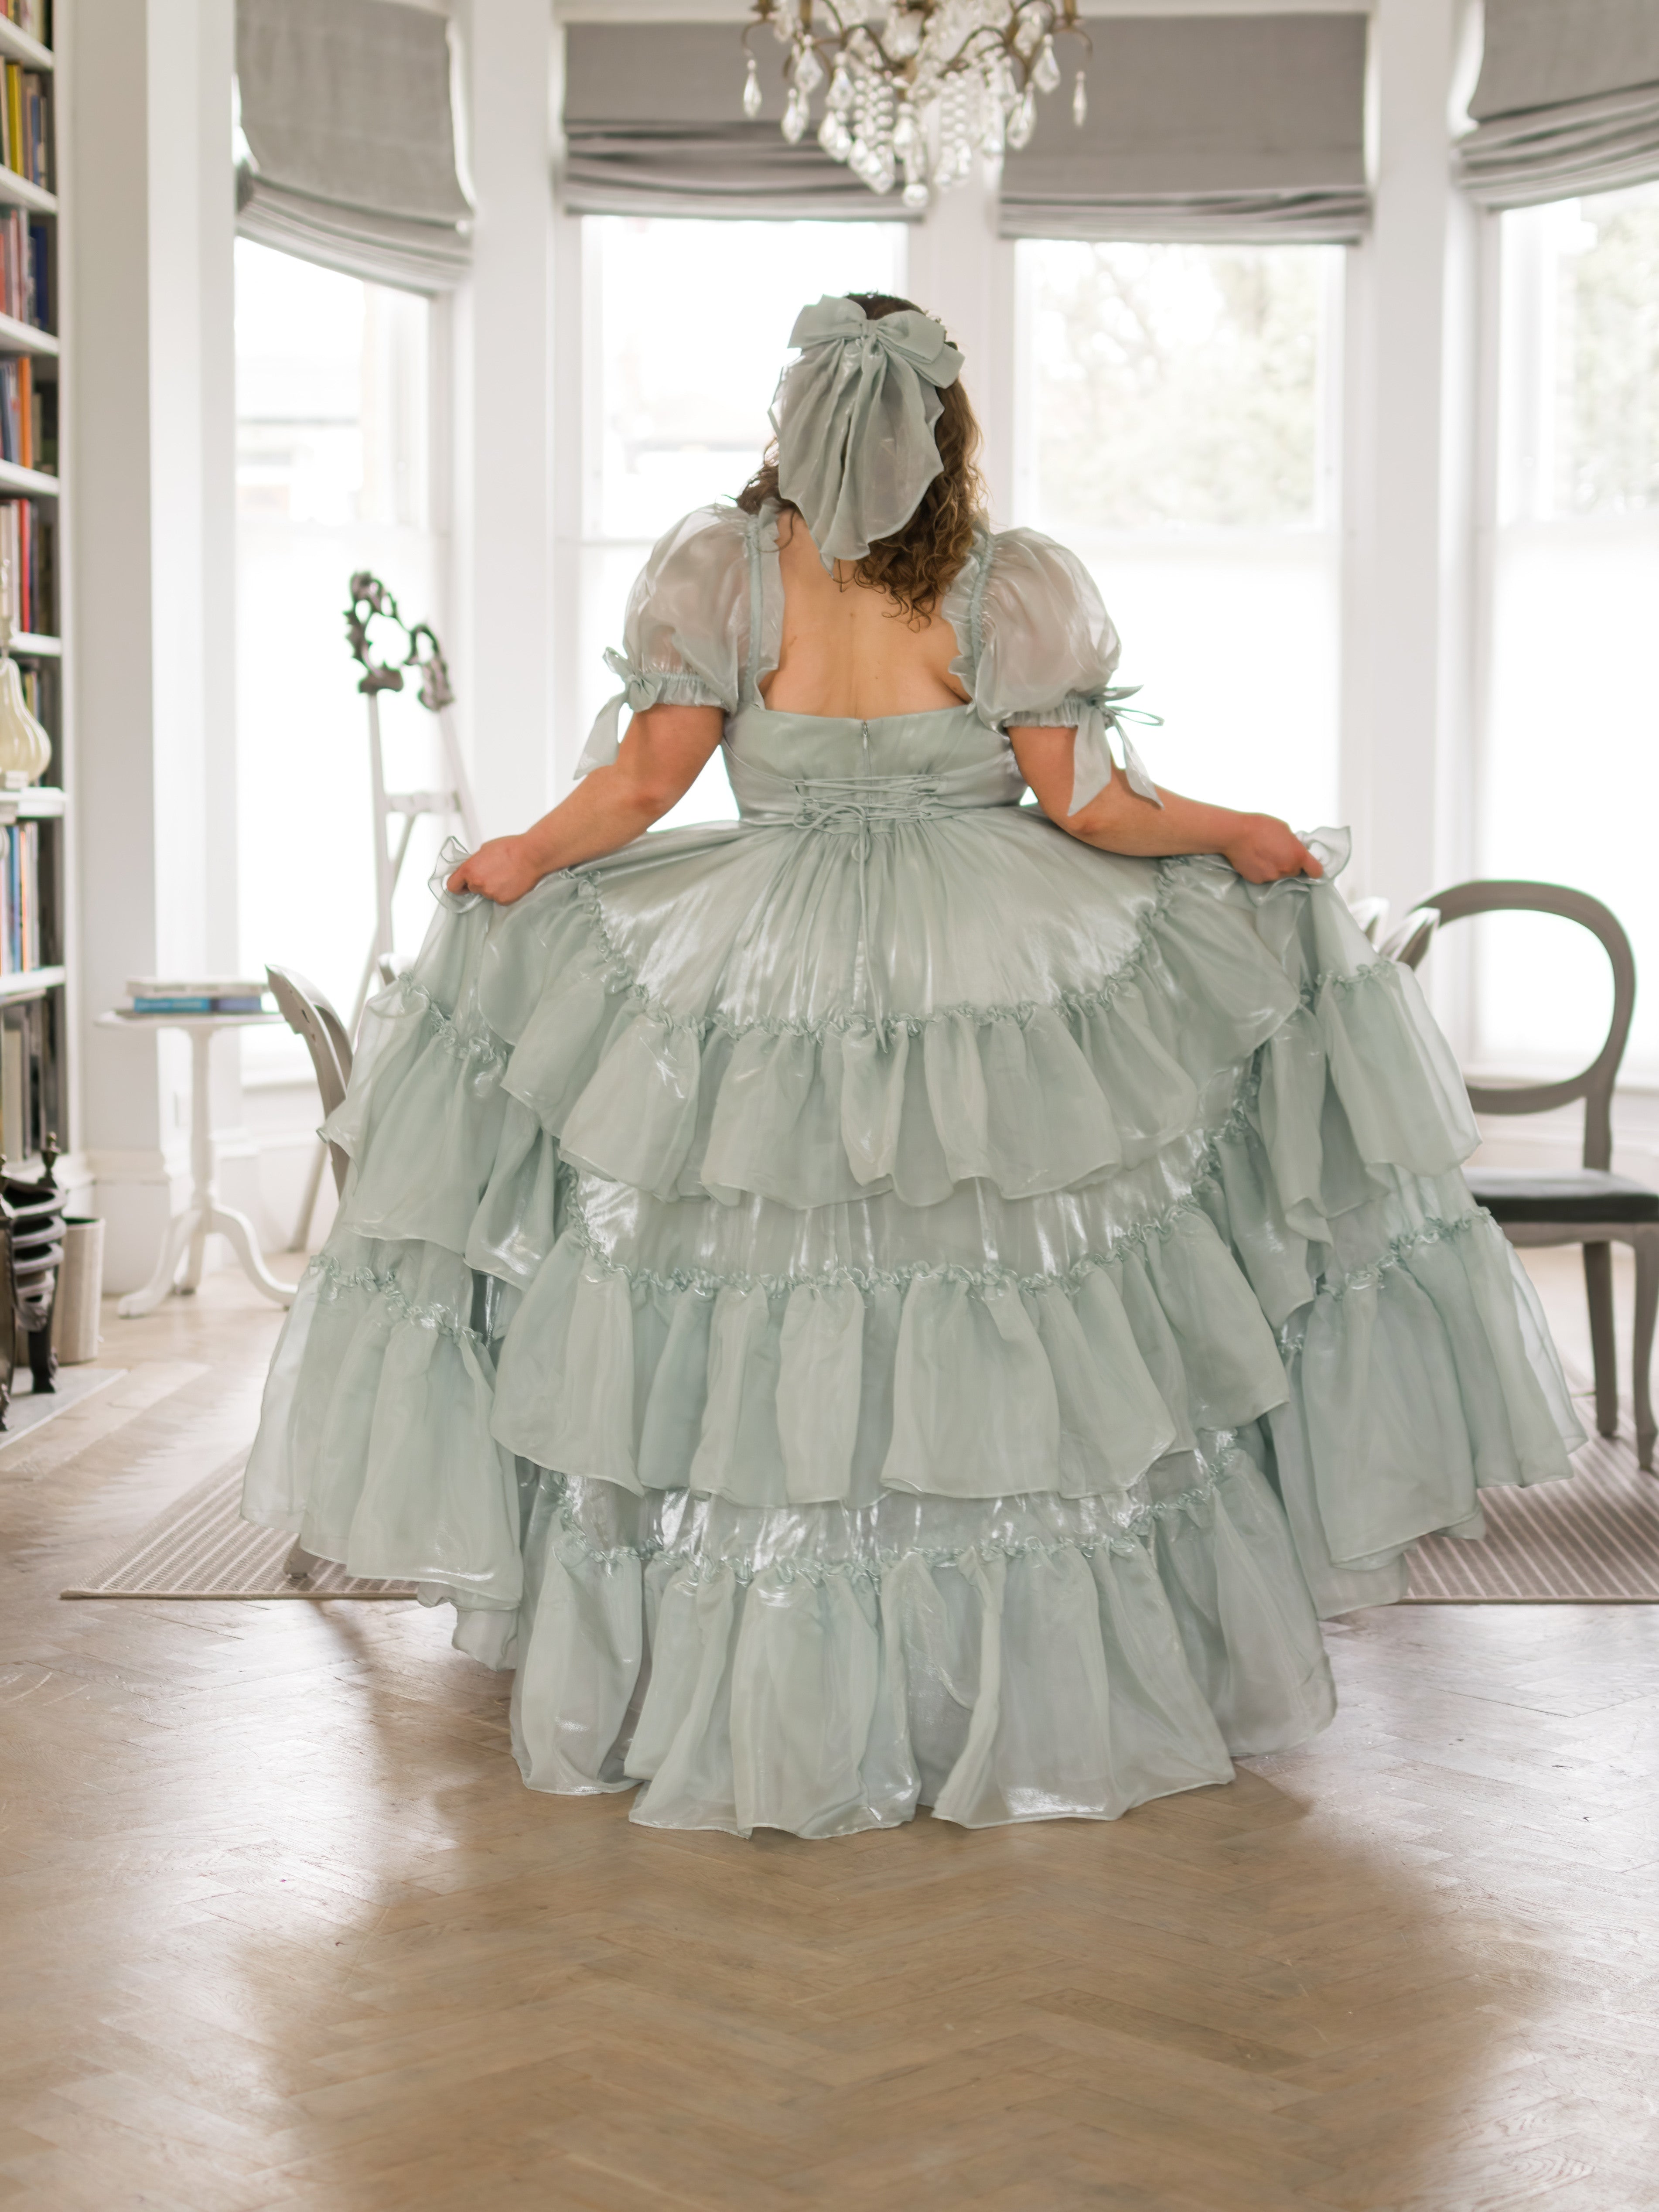 Heart of Glass Mademoiselle Gown